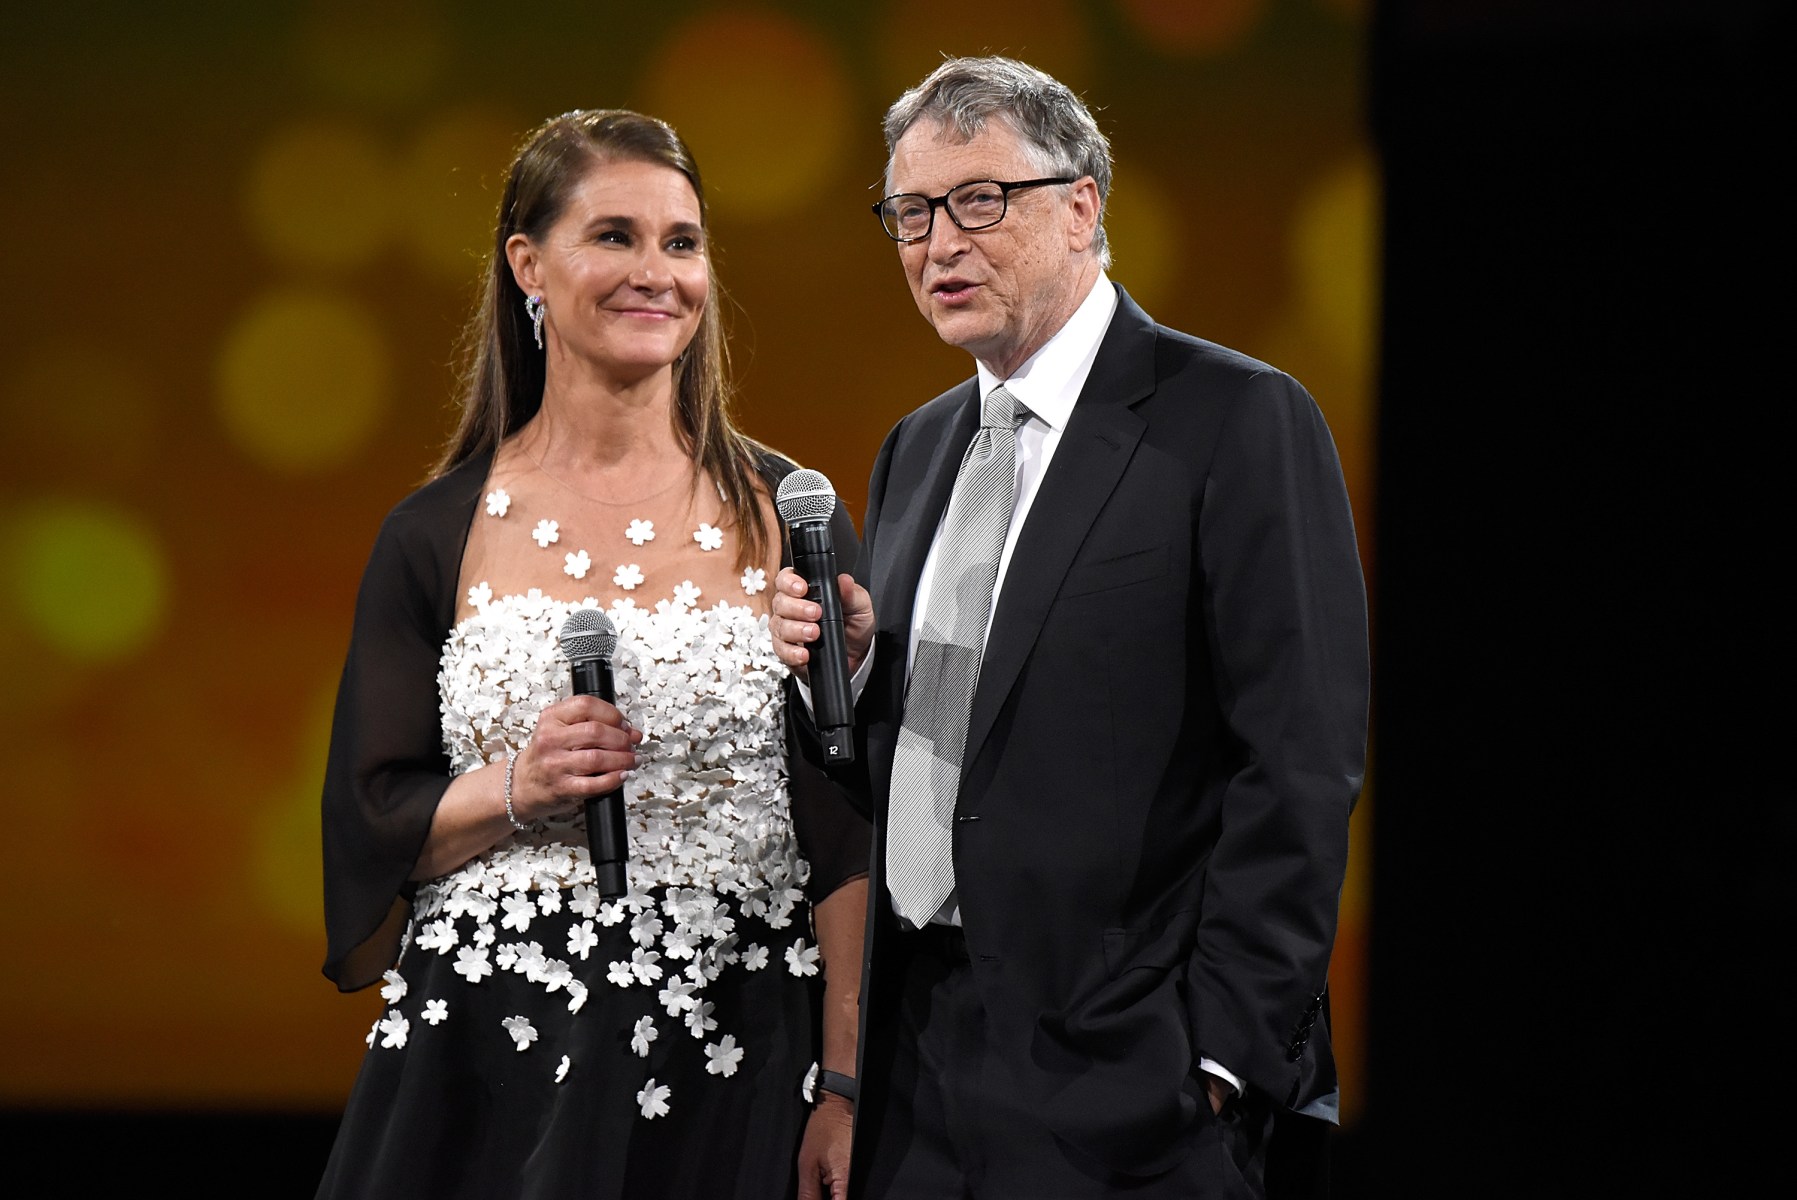 Bill And Melinda Gates / Bill and Melinda Gates Annual Letter: 3 Things You Need to ... - All lives have equal value.